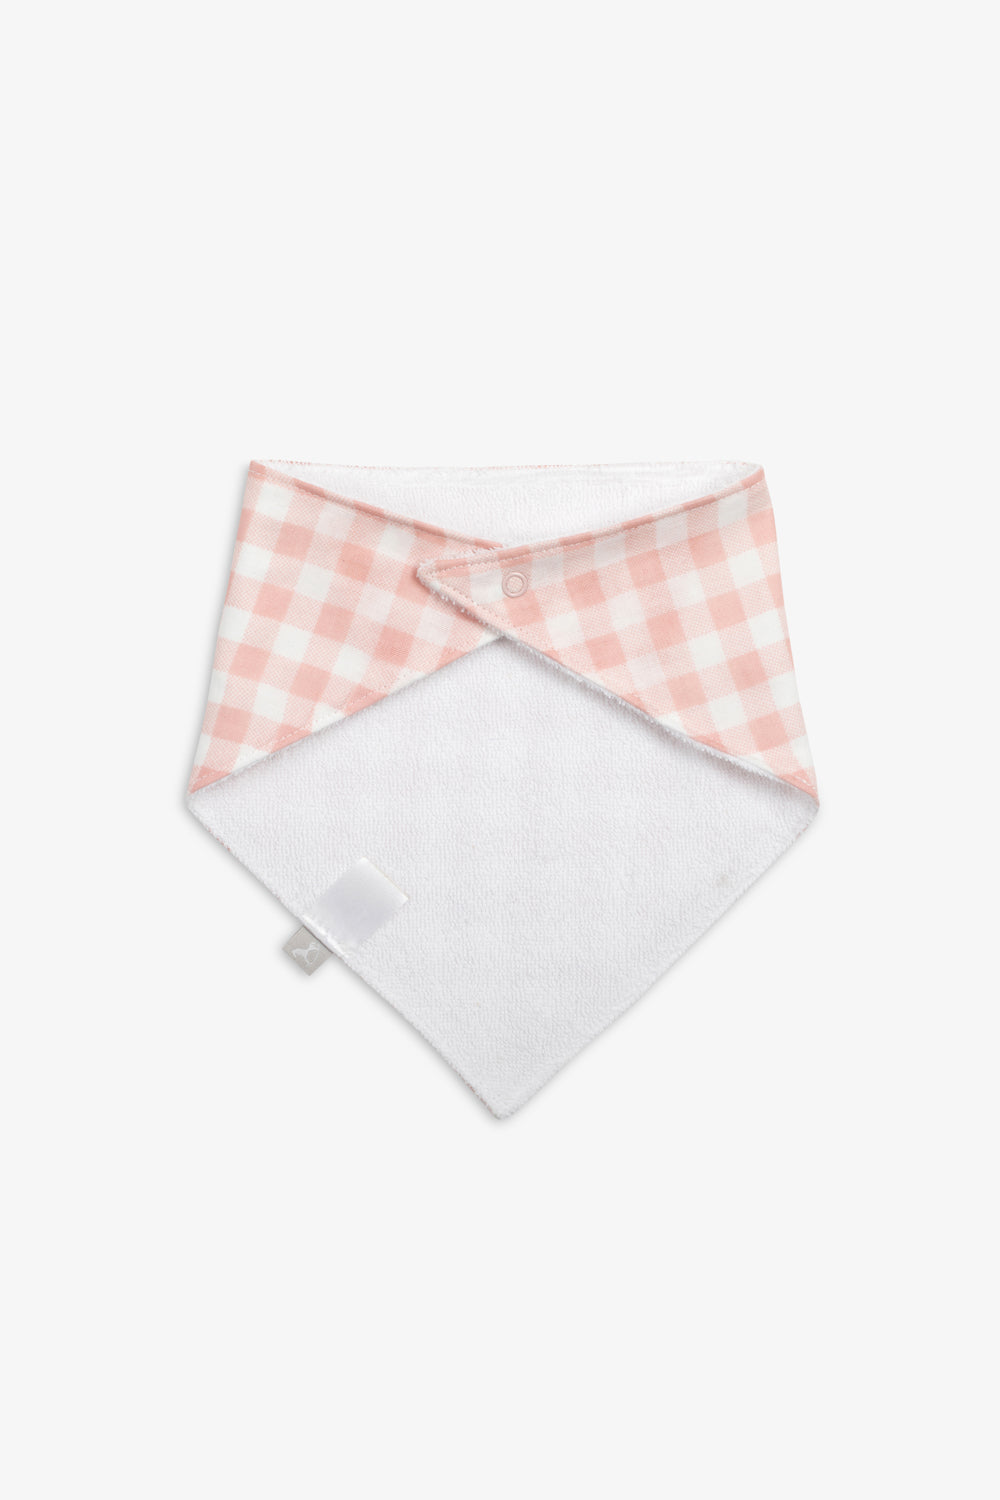 Muslin 2pk Towelling Backed Bib, pink woodland and pink gingham print